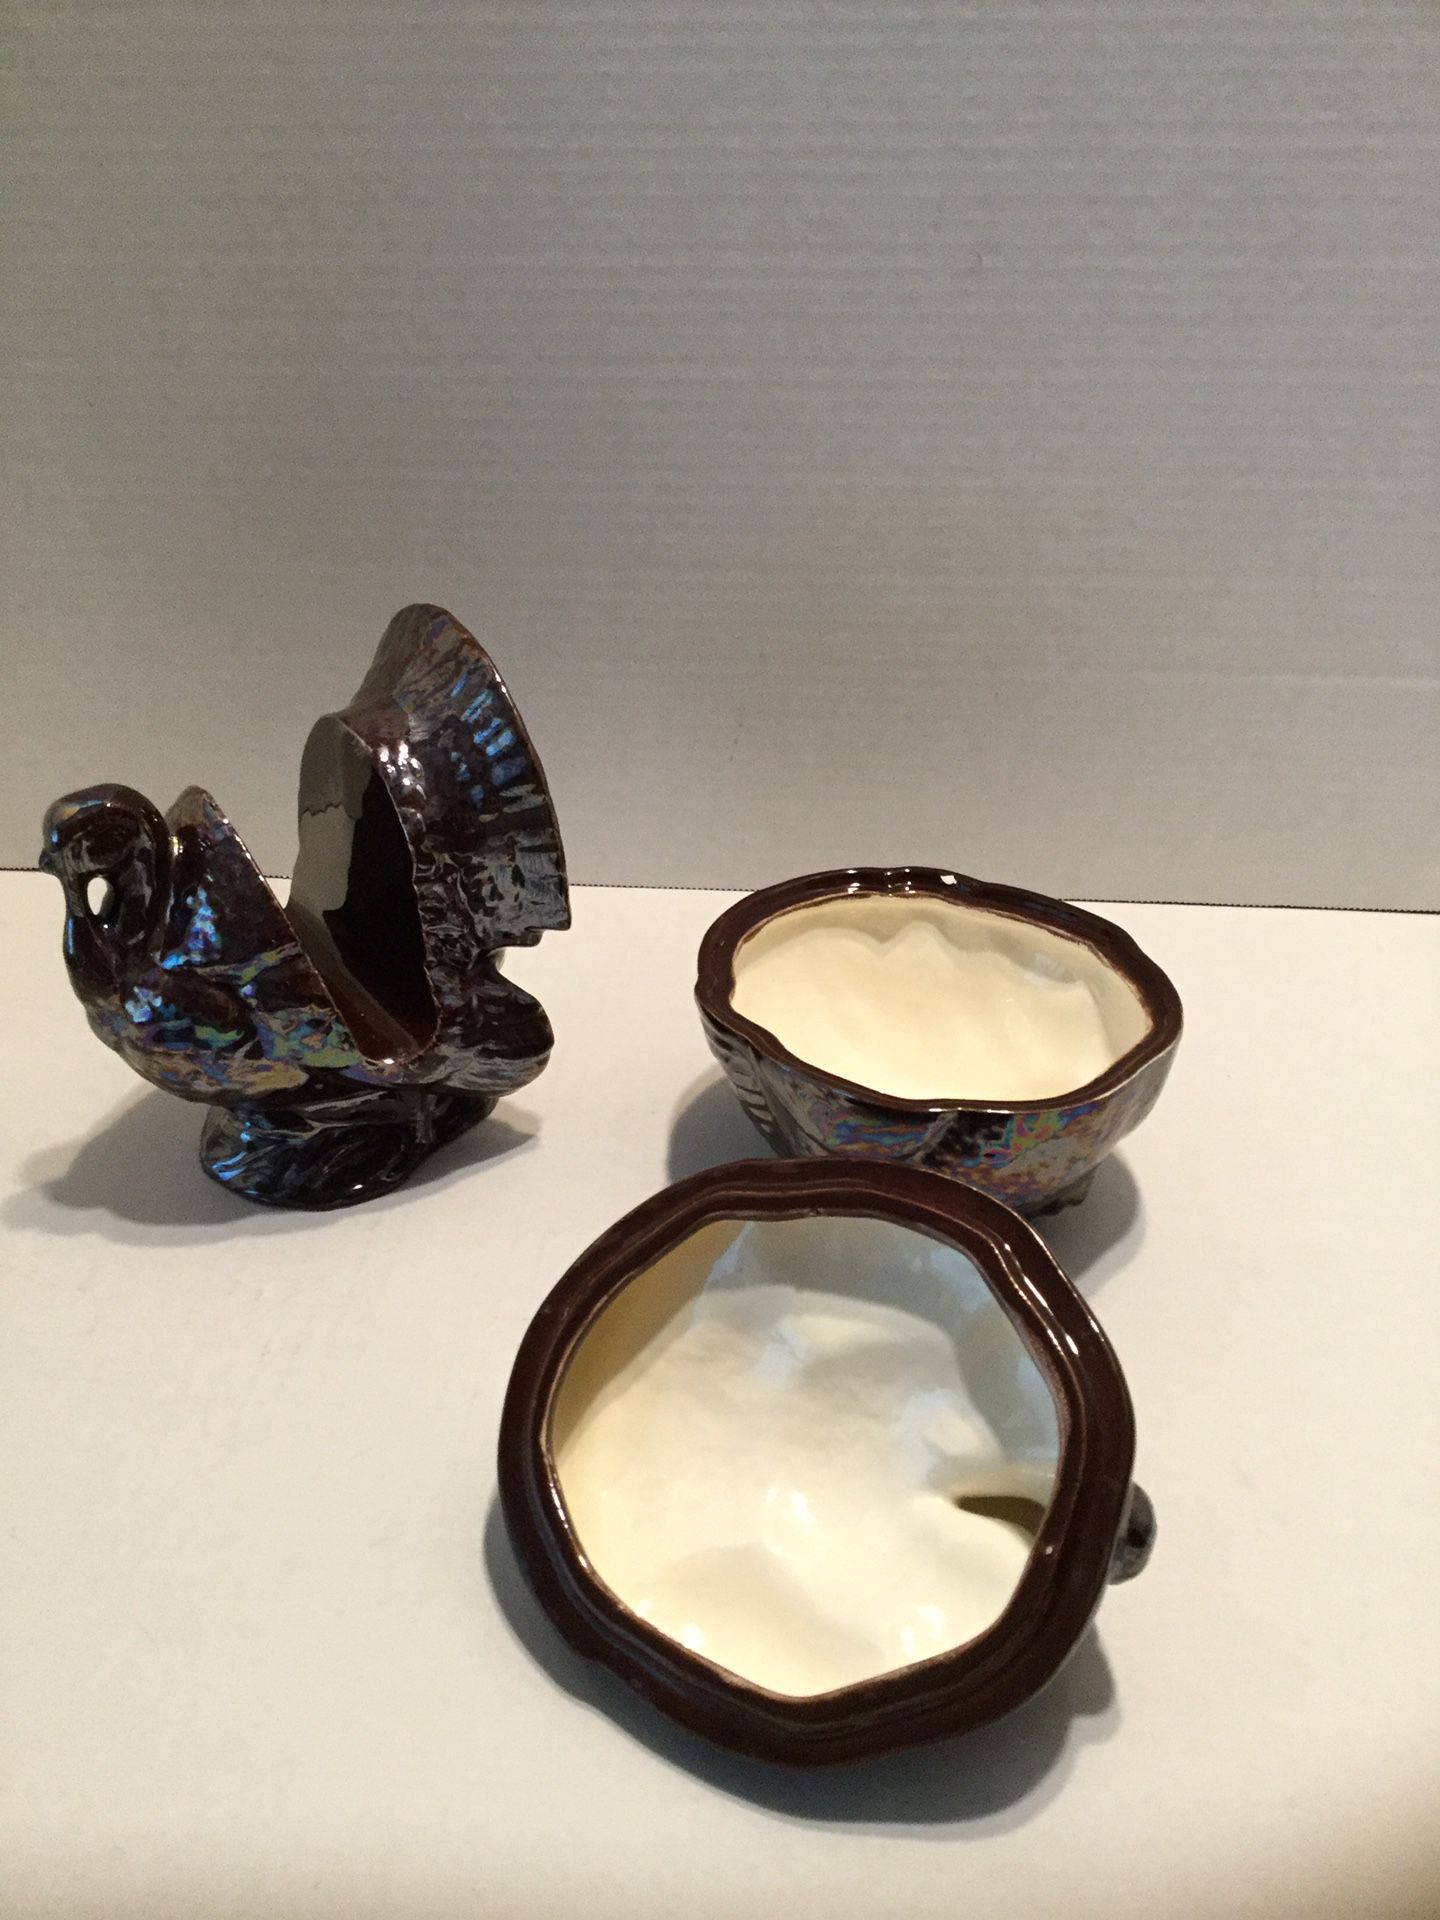 Beautiful Vintage Turkey Set Napkin Holder and a Butter Dish Absolutely Stunning Unable to read a hallmark